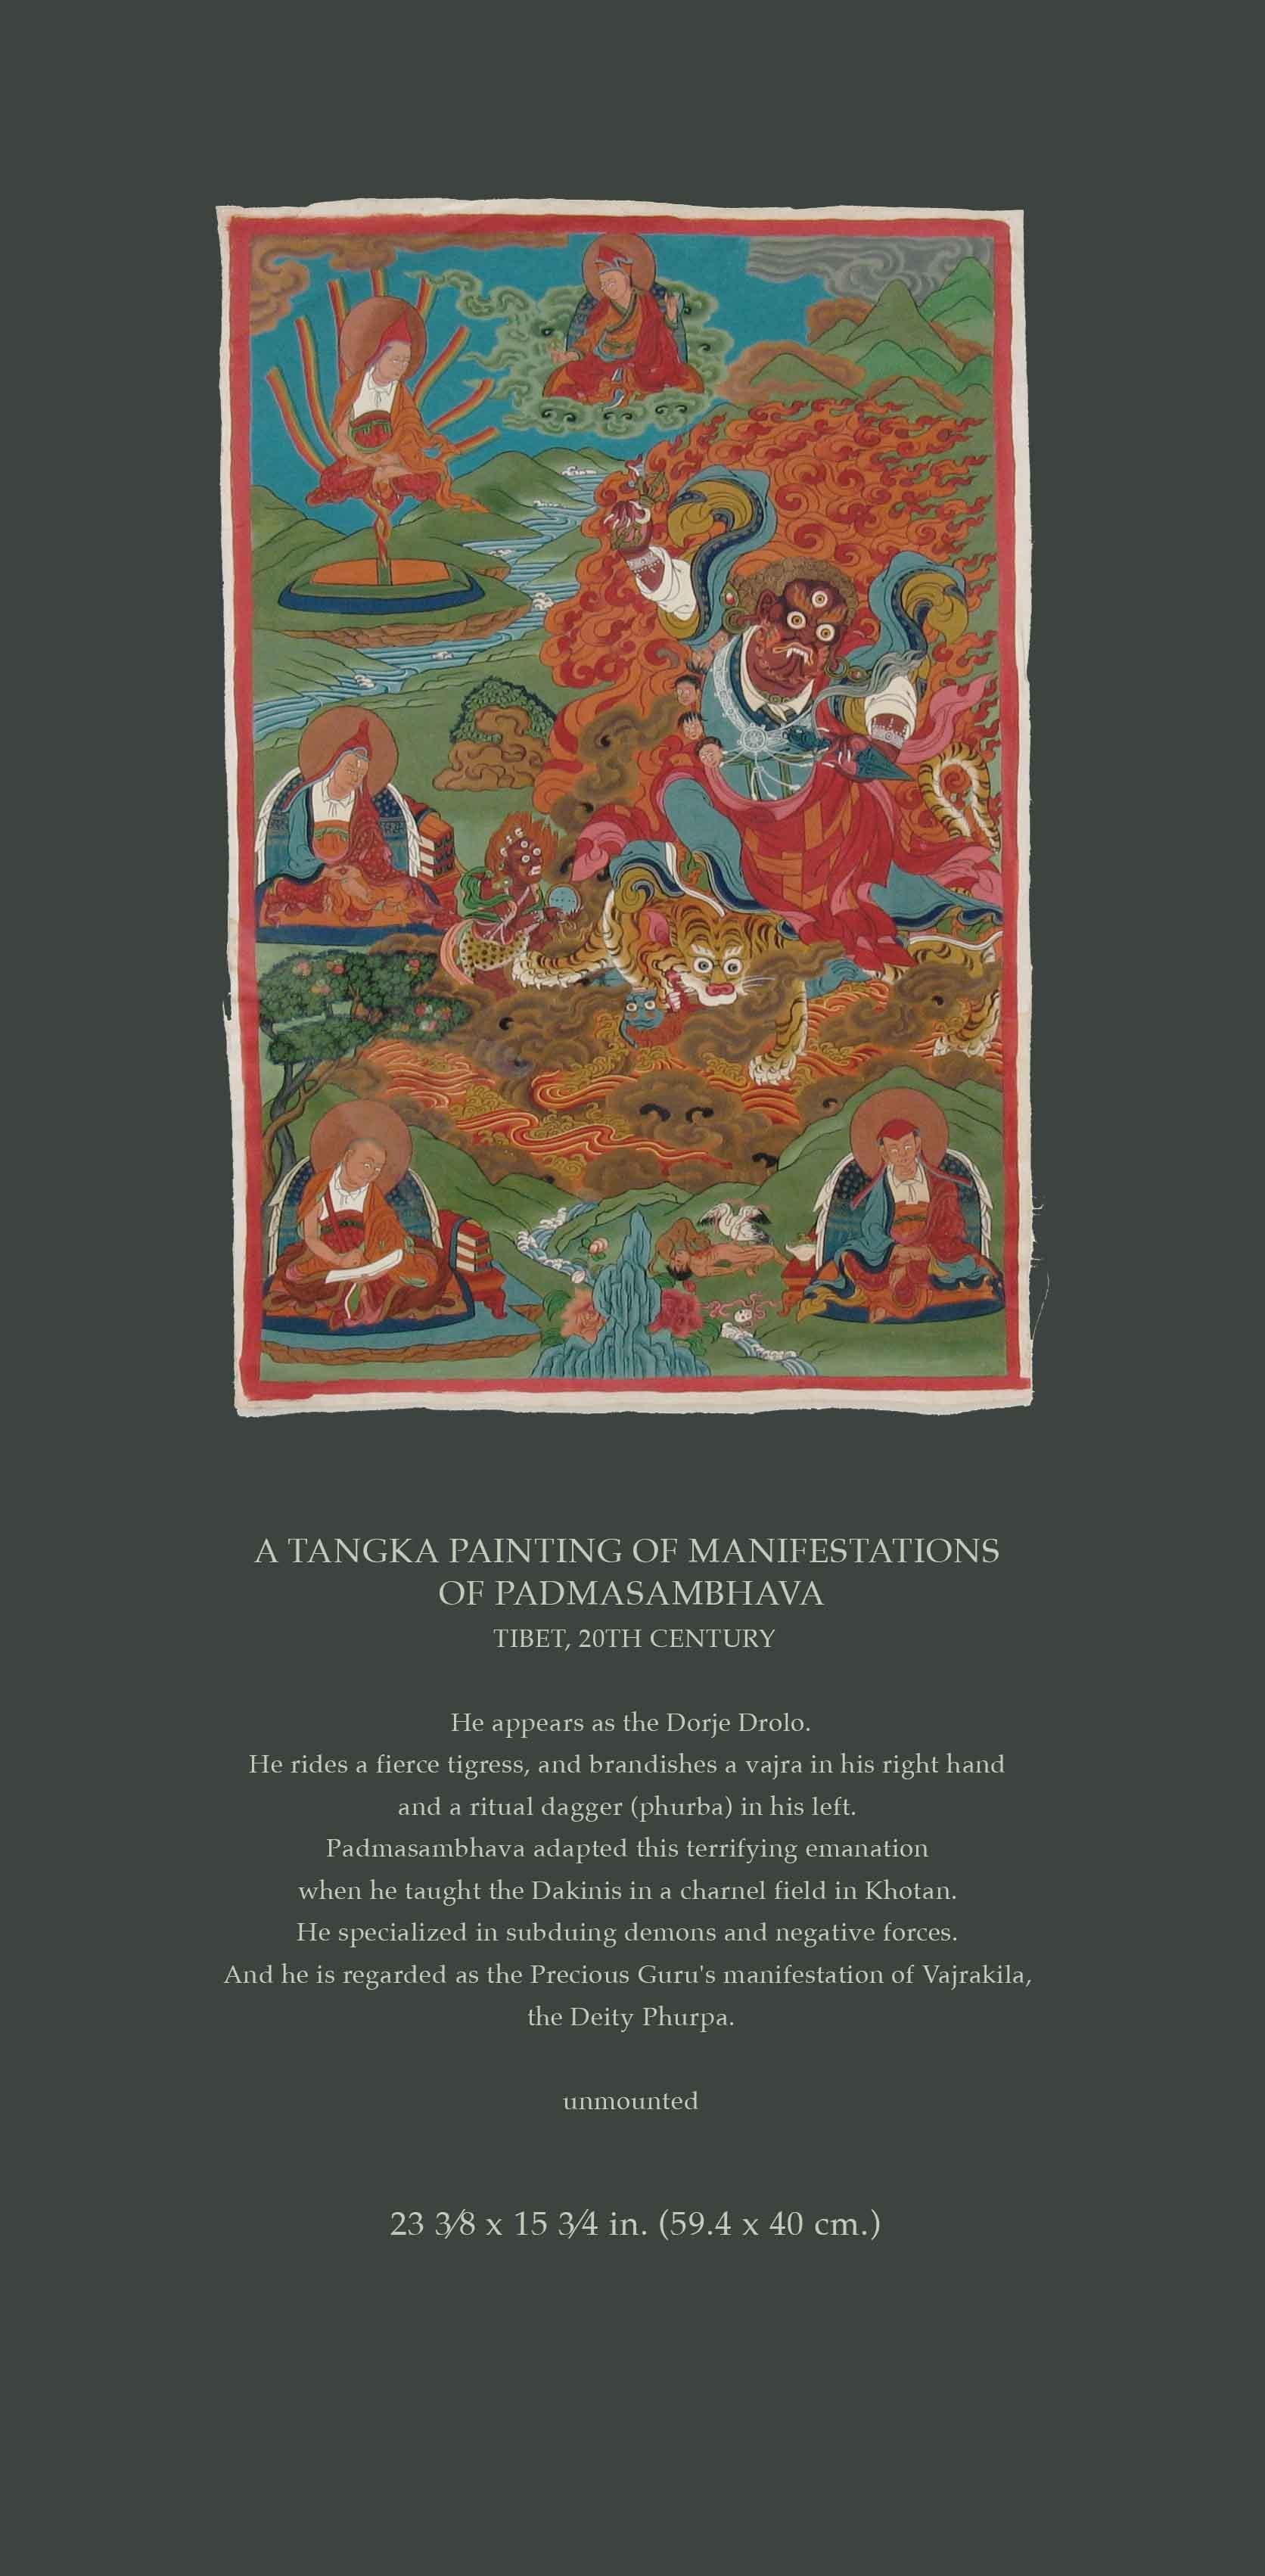 A TANGKA PAINTING OF MANIFESTATIONS
OF PADMASAMBHAVA
TIBET, 20TH CENTURY

He appears as the Dorje Drolo.
He rides a fierce tigress, and brandishes a vajra in his right hand
and a ritual dagger (phurba) in his left.
Padmasambhava adapted this